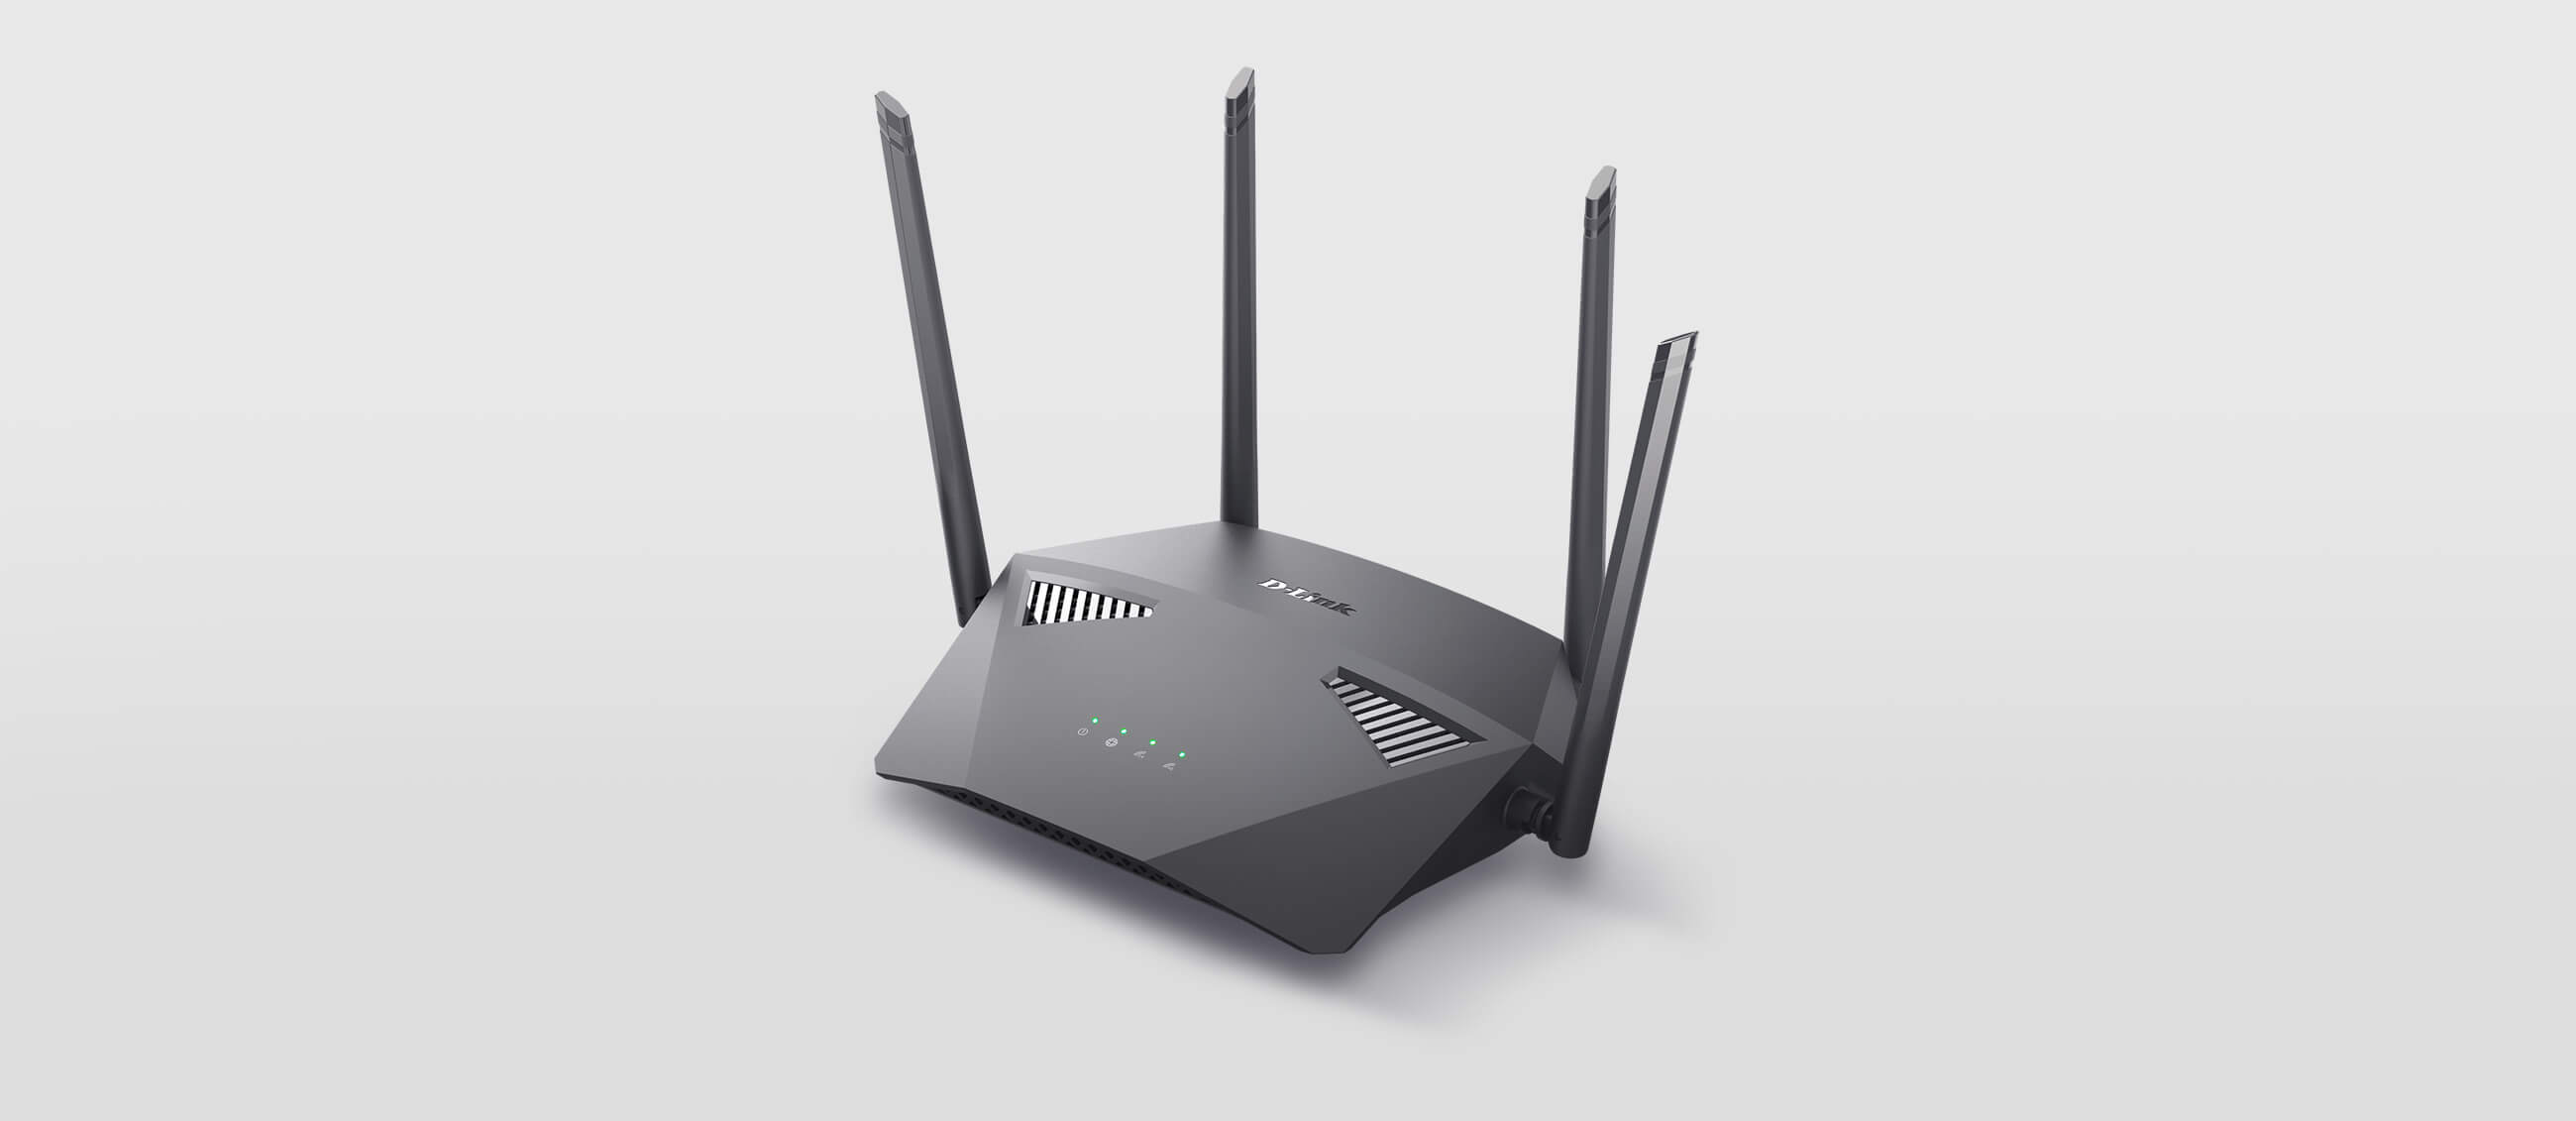 DIR-1950 AC1900 MU-MIMO Wi-Fi Router with a grey background